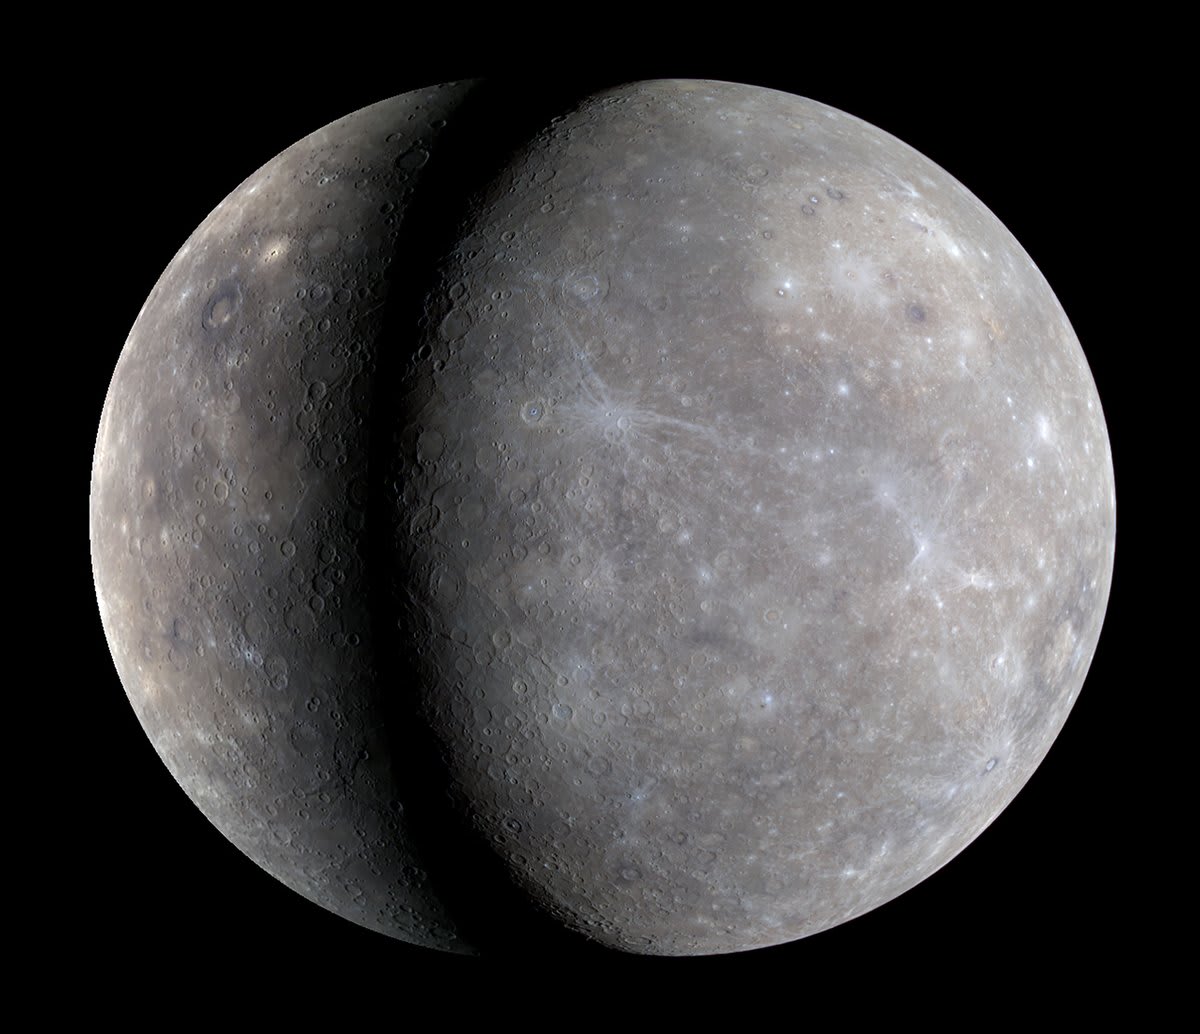 A new blog analyzes image composites of two flyby views of Mercury from the MESSENGER spacecraft and other data. Could it be that the planet has not cooled and shrunken as much as previously thought? Read now: